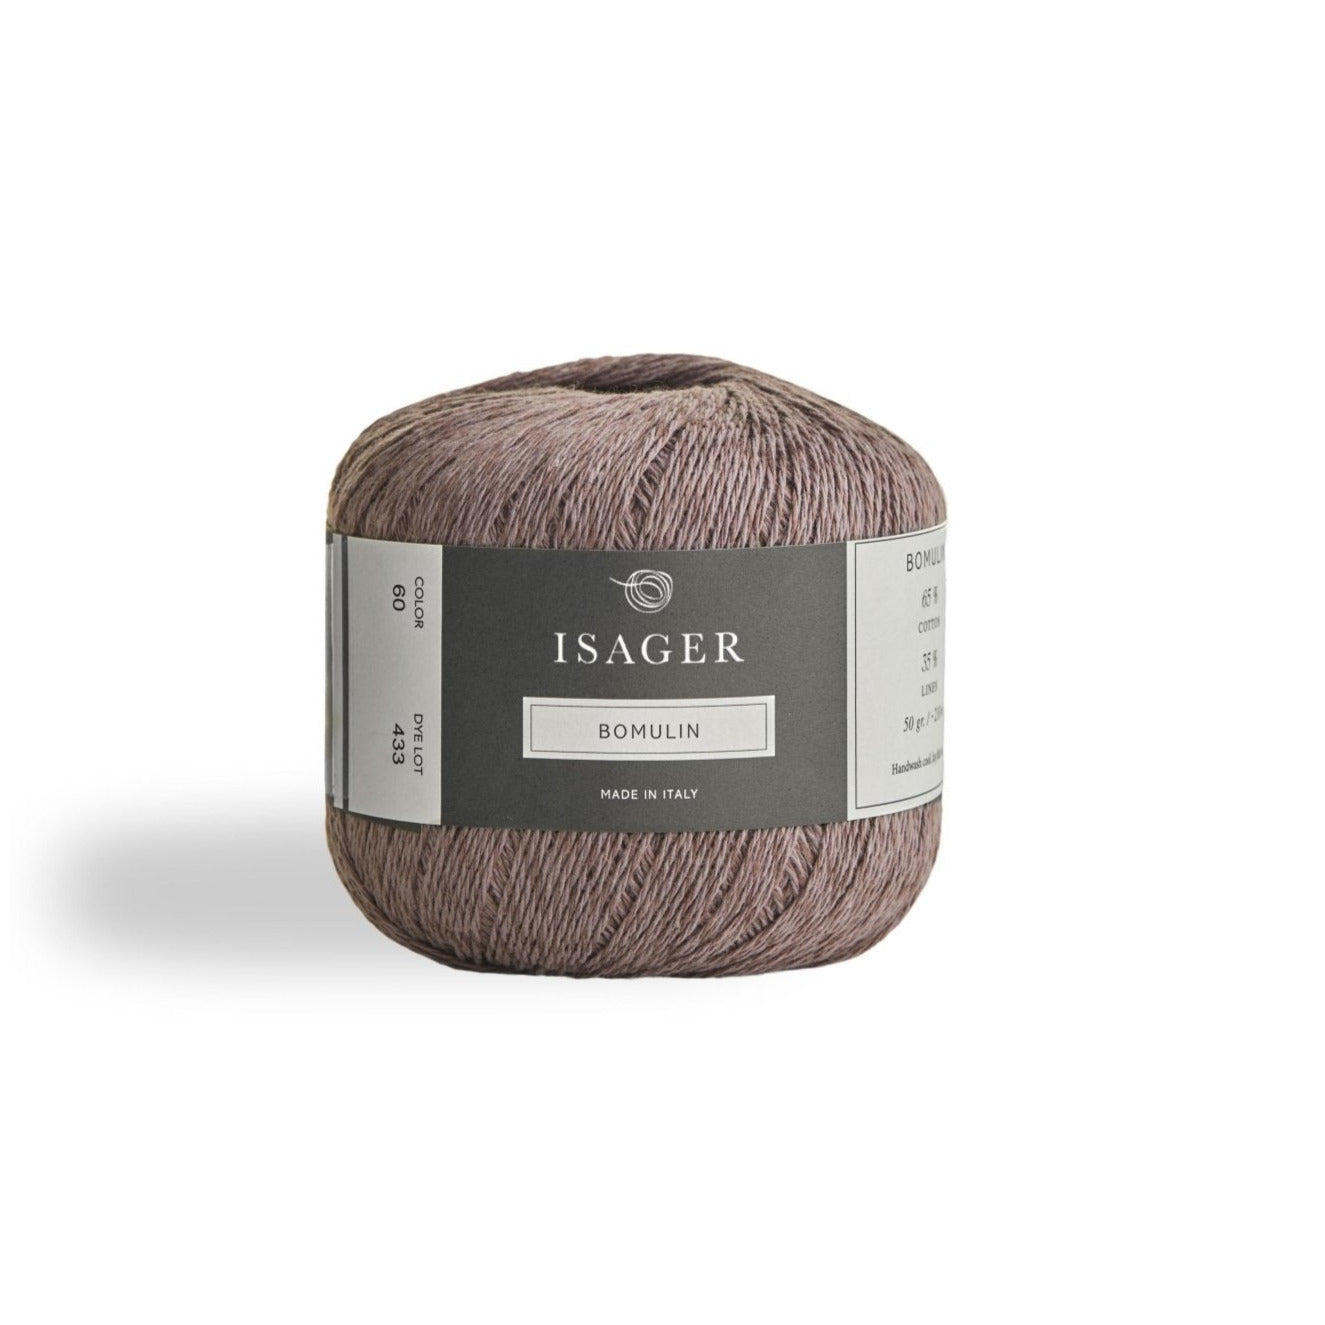 Isager Bomulin - 60 - 3 Ply - Cotton - The Little Yarn Store